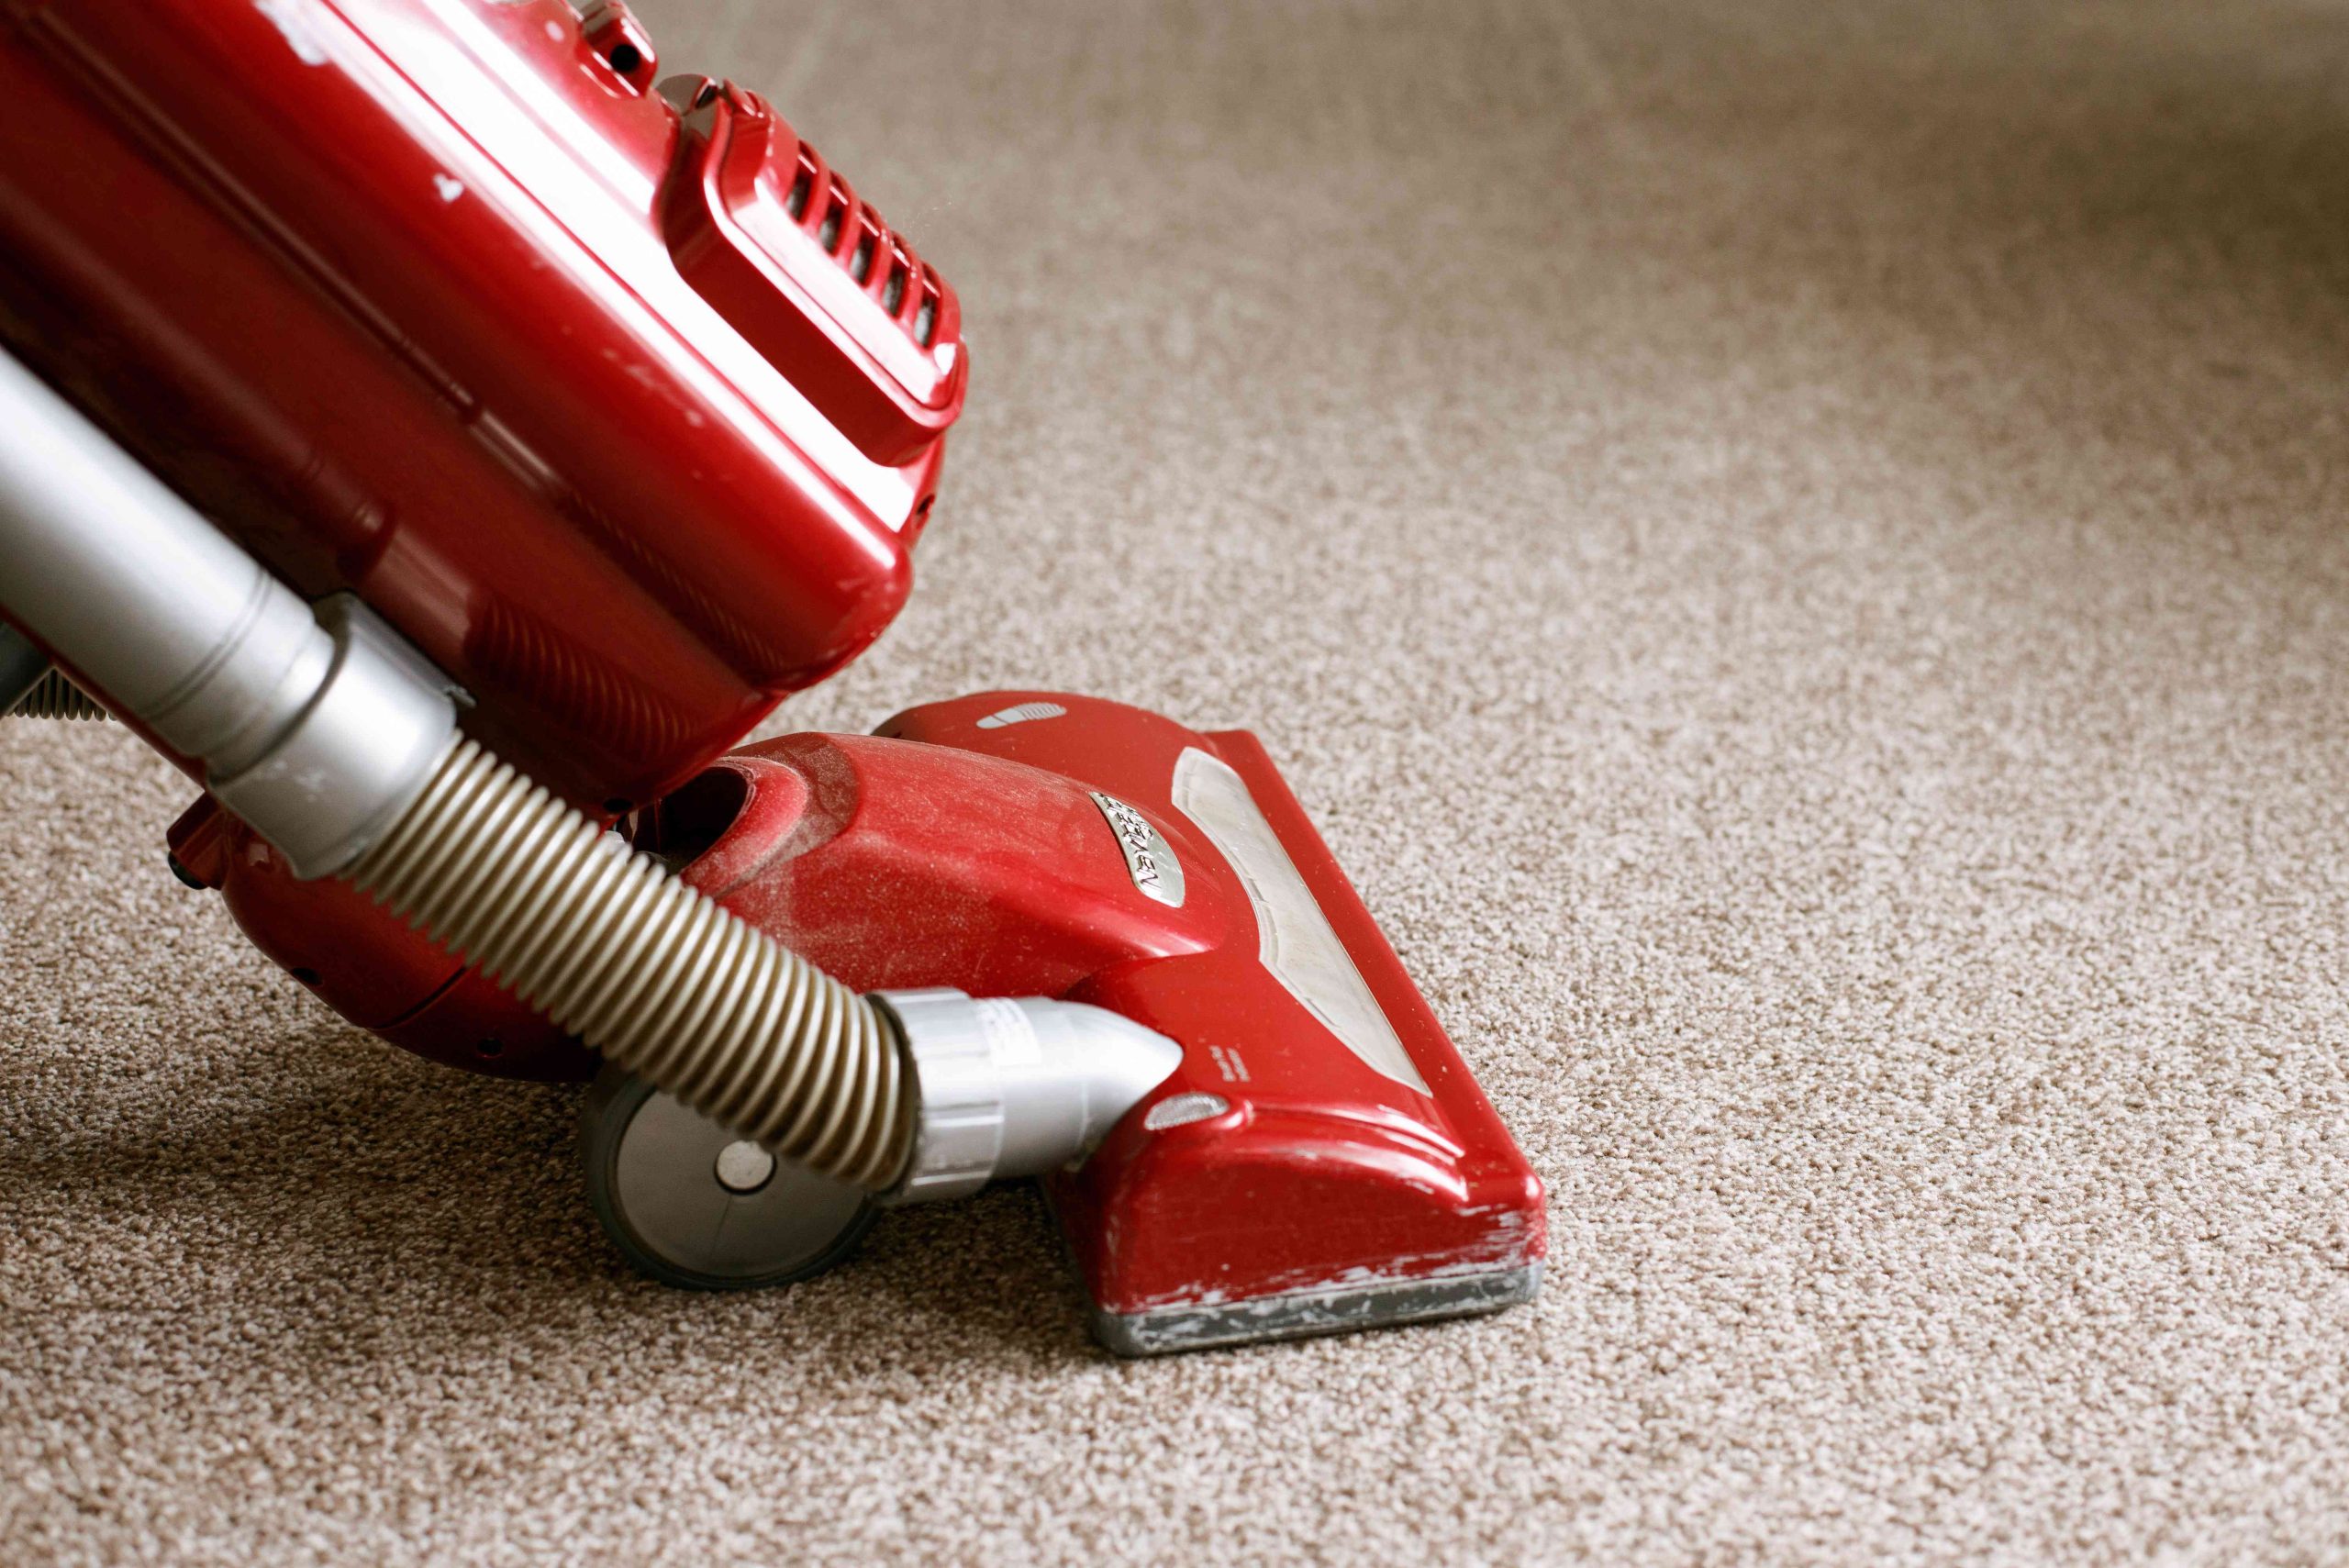 Get Your Carpets Cleaned Professionally Today!